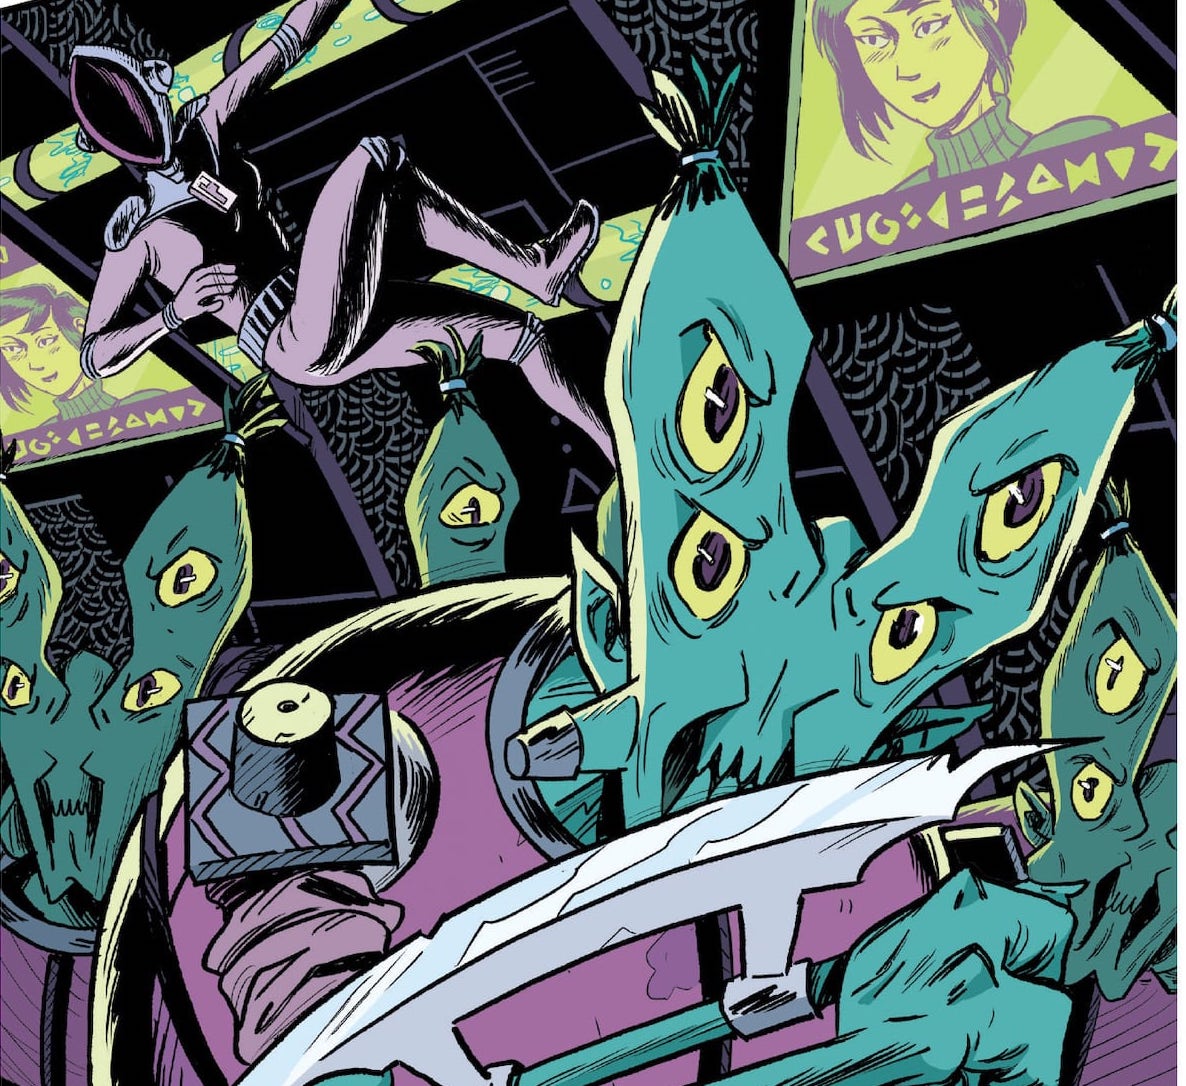 EXCLUSIVE Oni Press Preview: Action Journalism #1